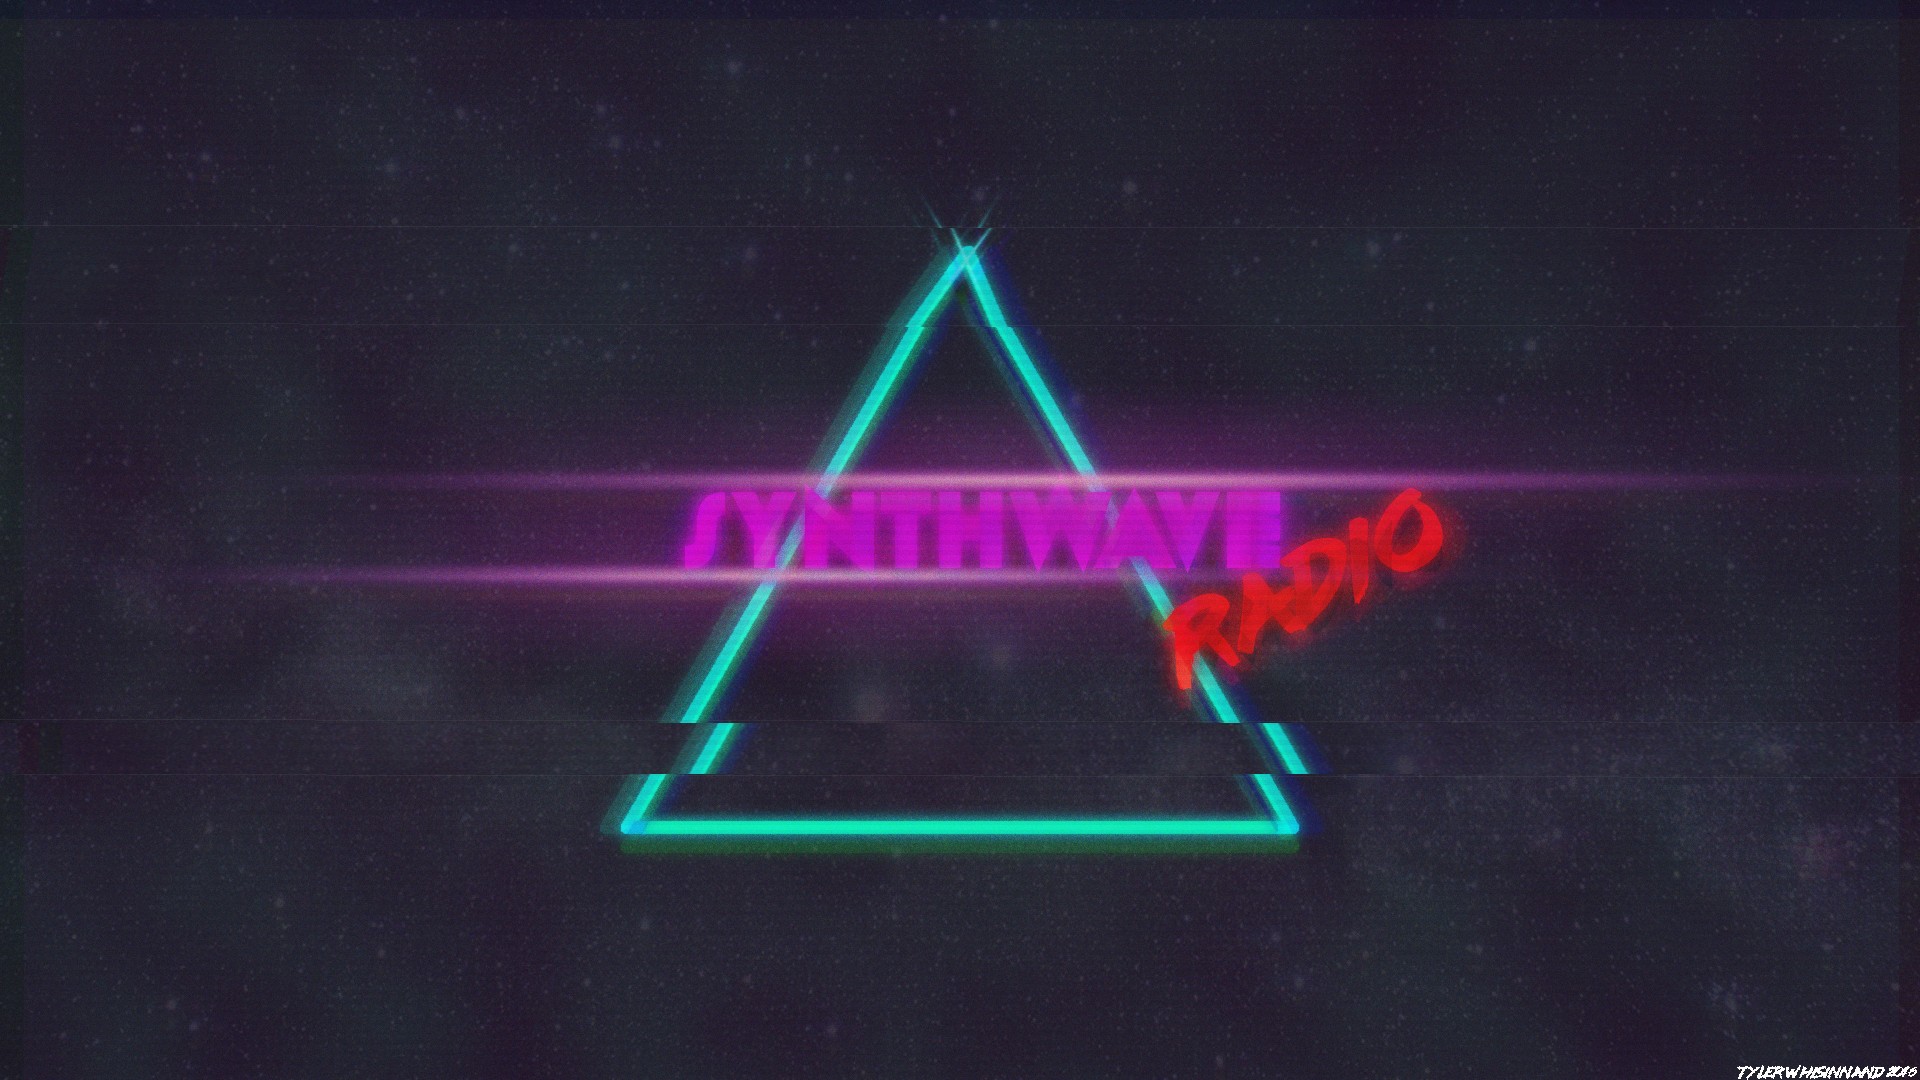 synthwave, New Retro Wave, 1980s, Retro style Wallpaper